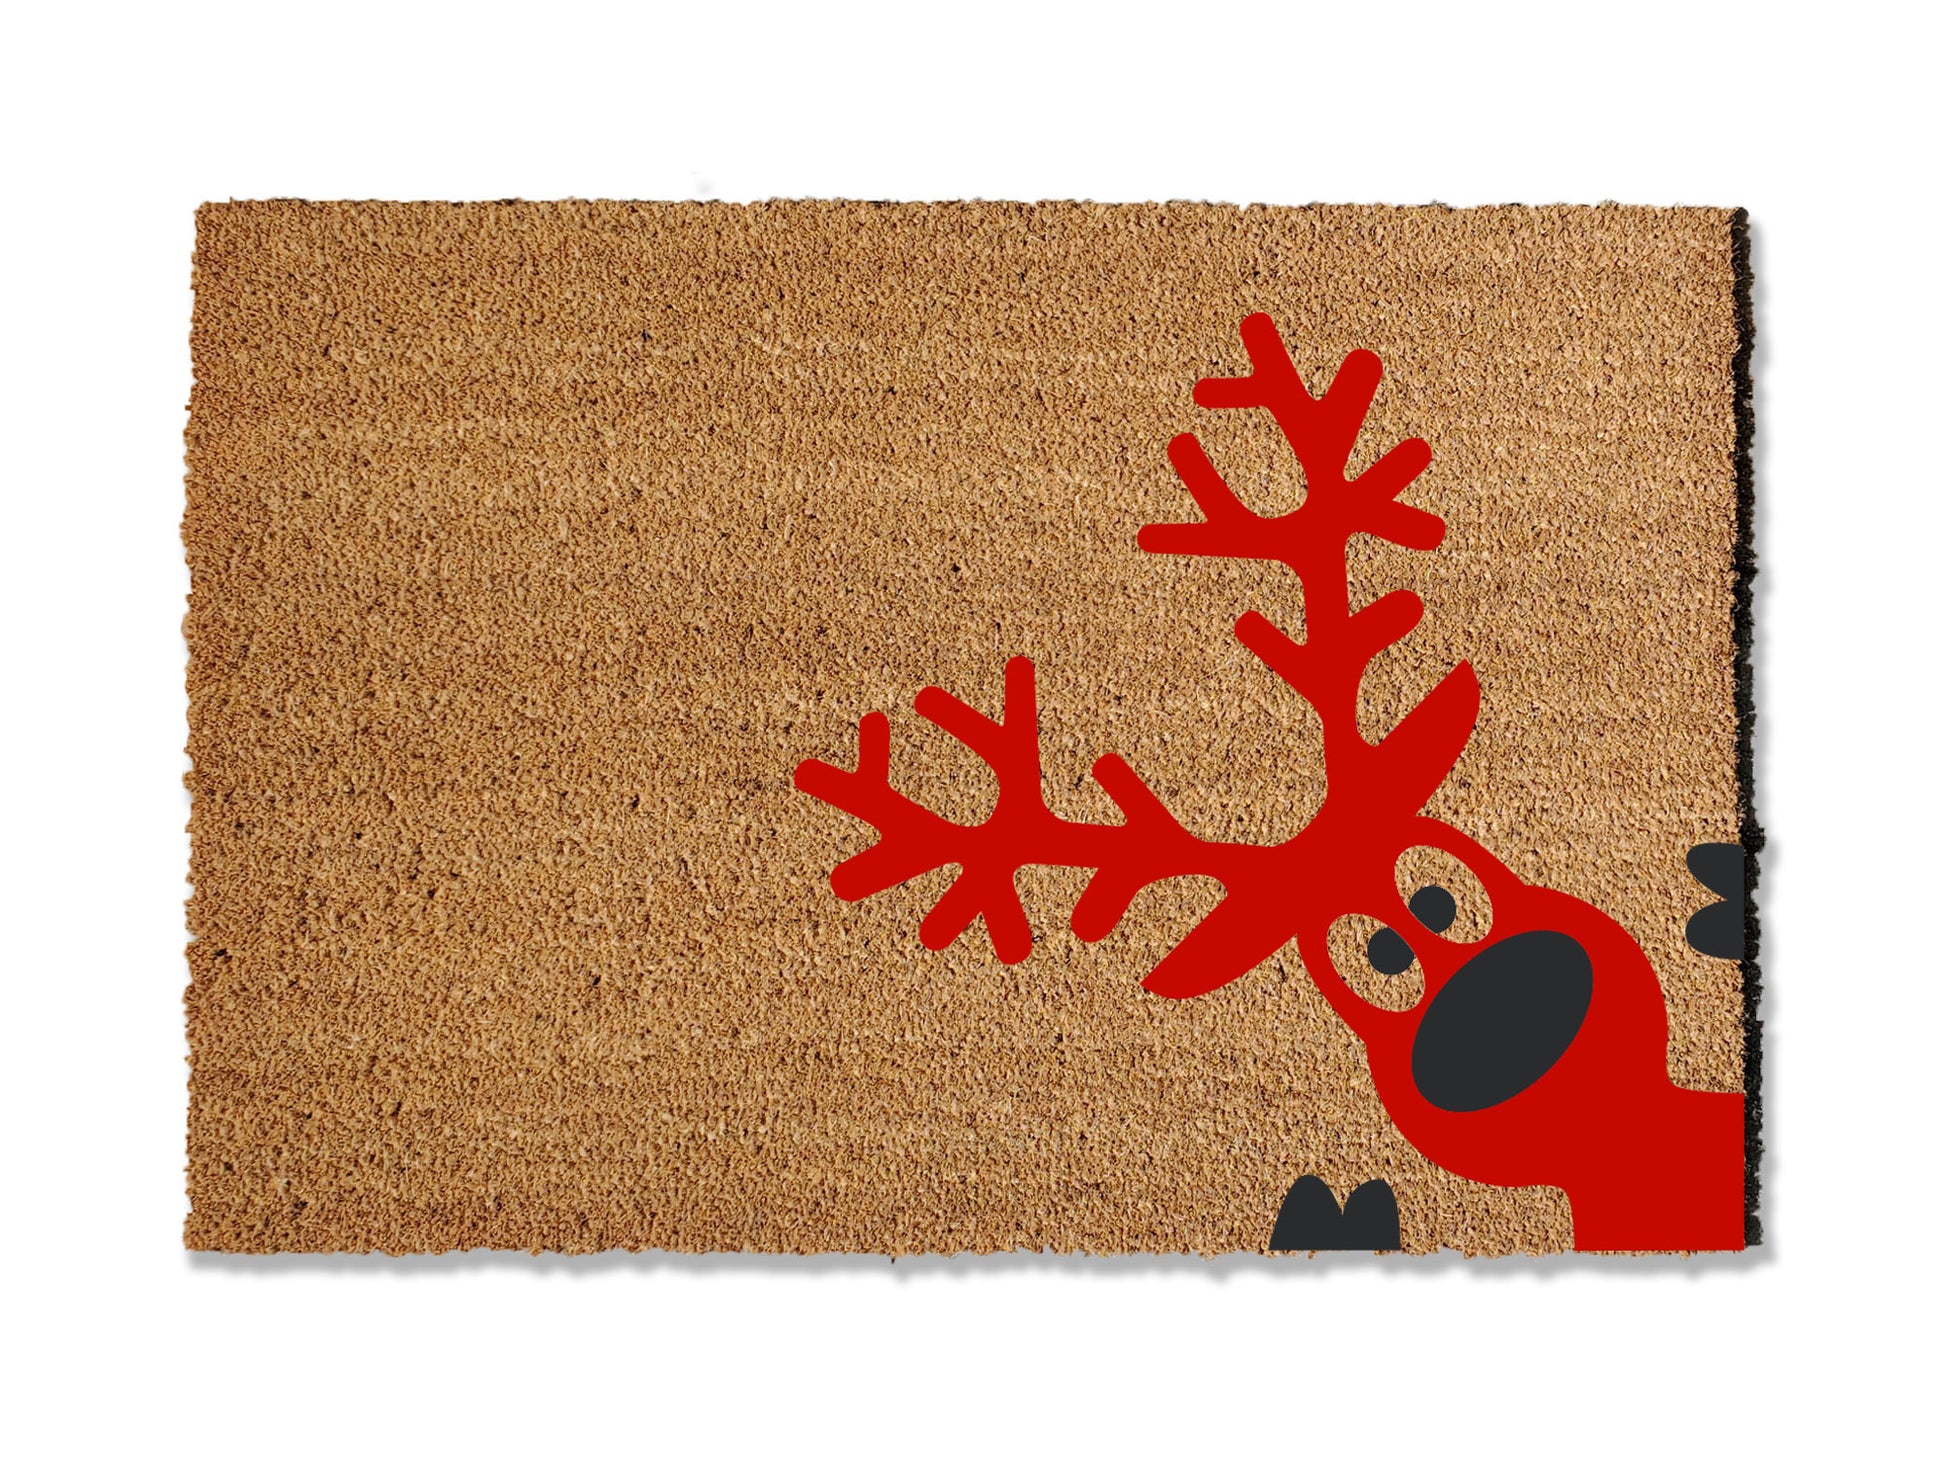 1/2 inch thick coir doormat adorned with an adorable reindeer. Perfect for elevating your entryway this holiday season, this decorative mat not only adds seasonal charm but is also highly effective at trapping dirt, ensuring a festive and tidy welcome."